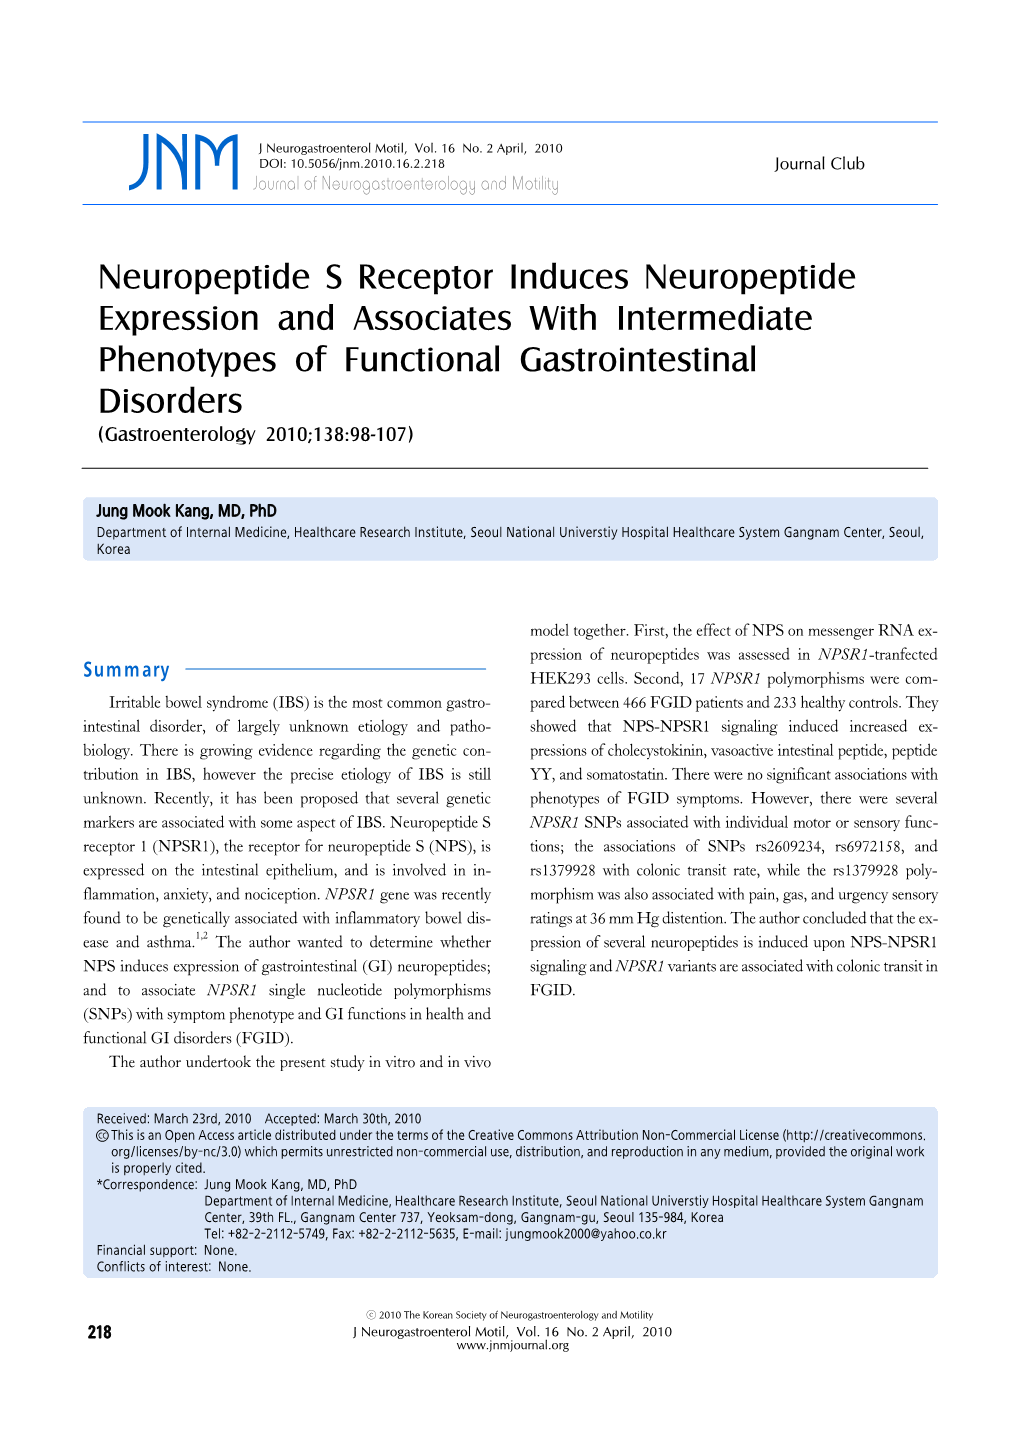 Neuropeptide S Receptor Induces Neuropeptide Expression and Associates with Intermediate Phenotypes of Functional Gastrointestin